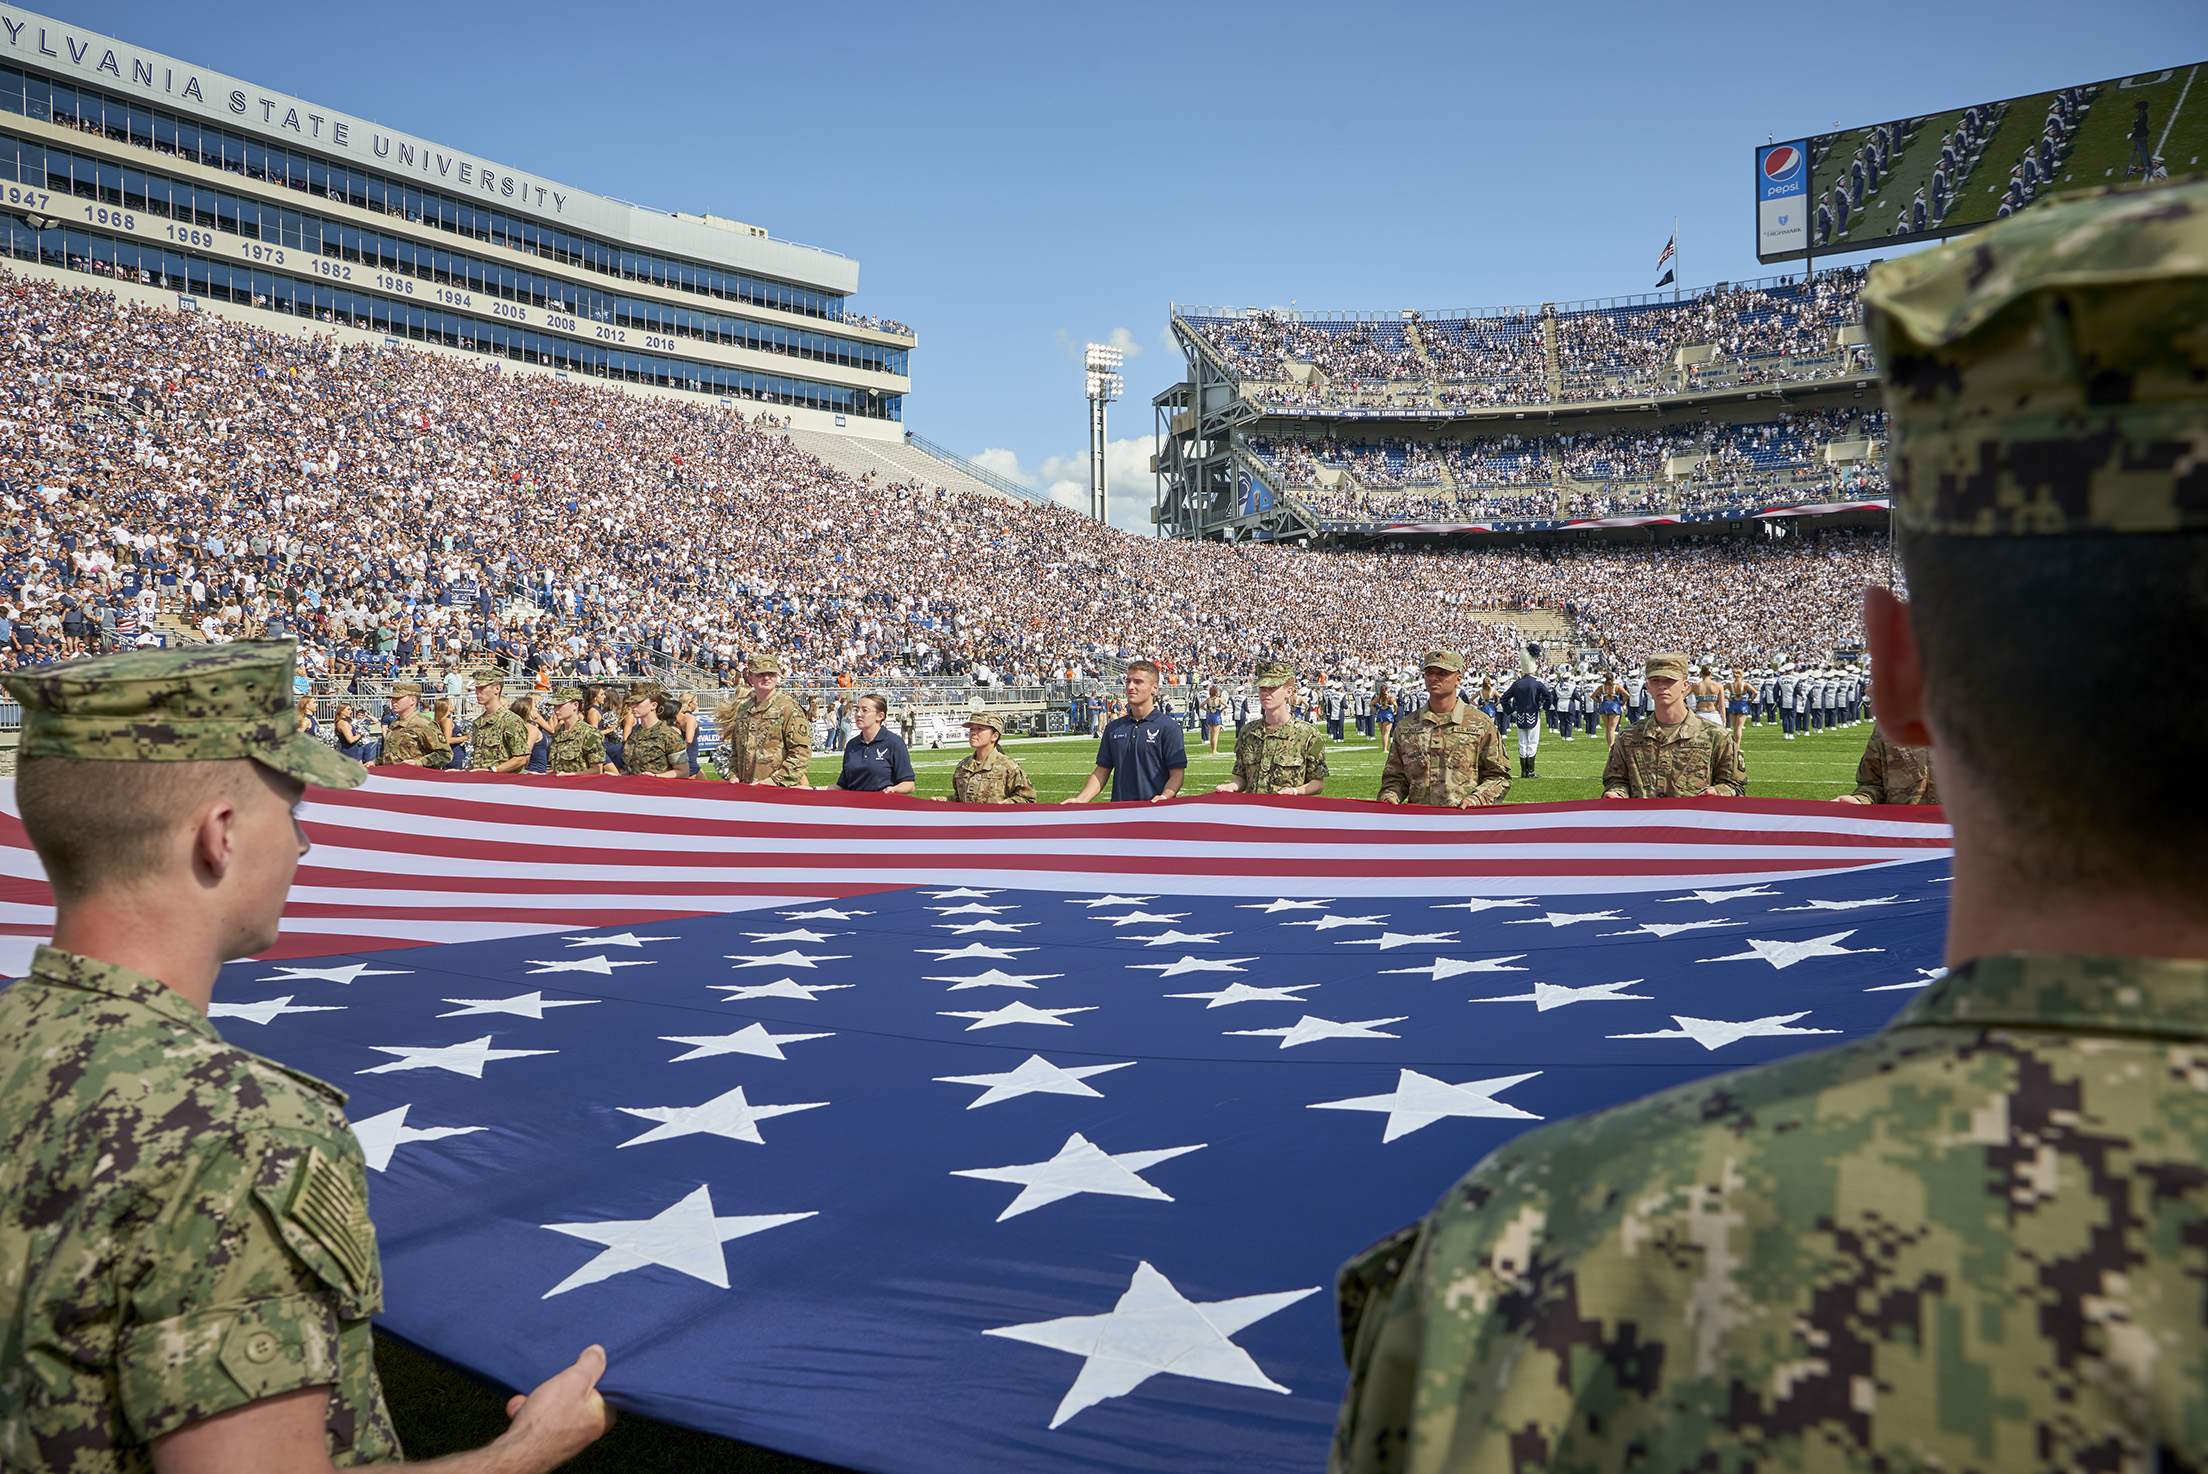 Military personnel with American flag in Beaver Stadium